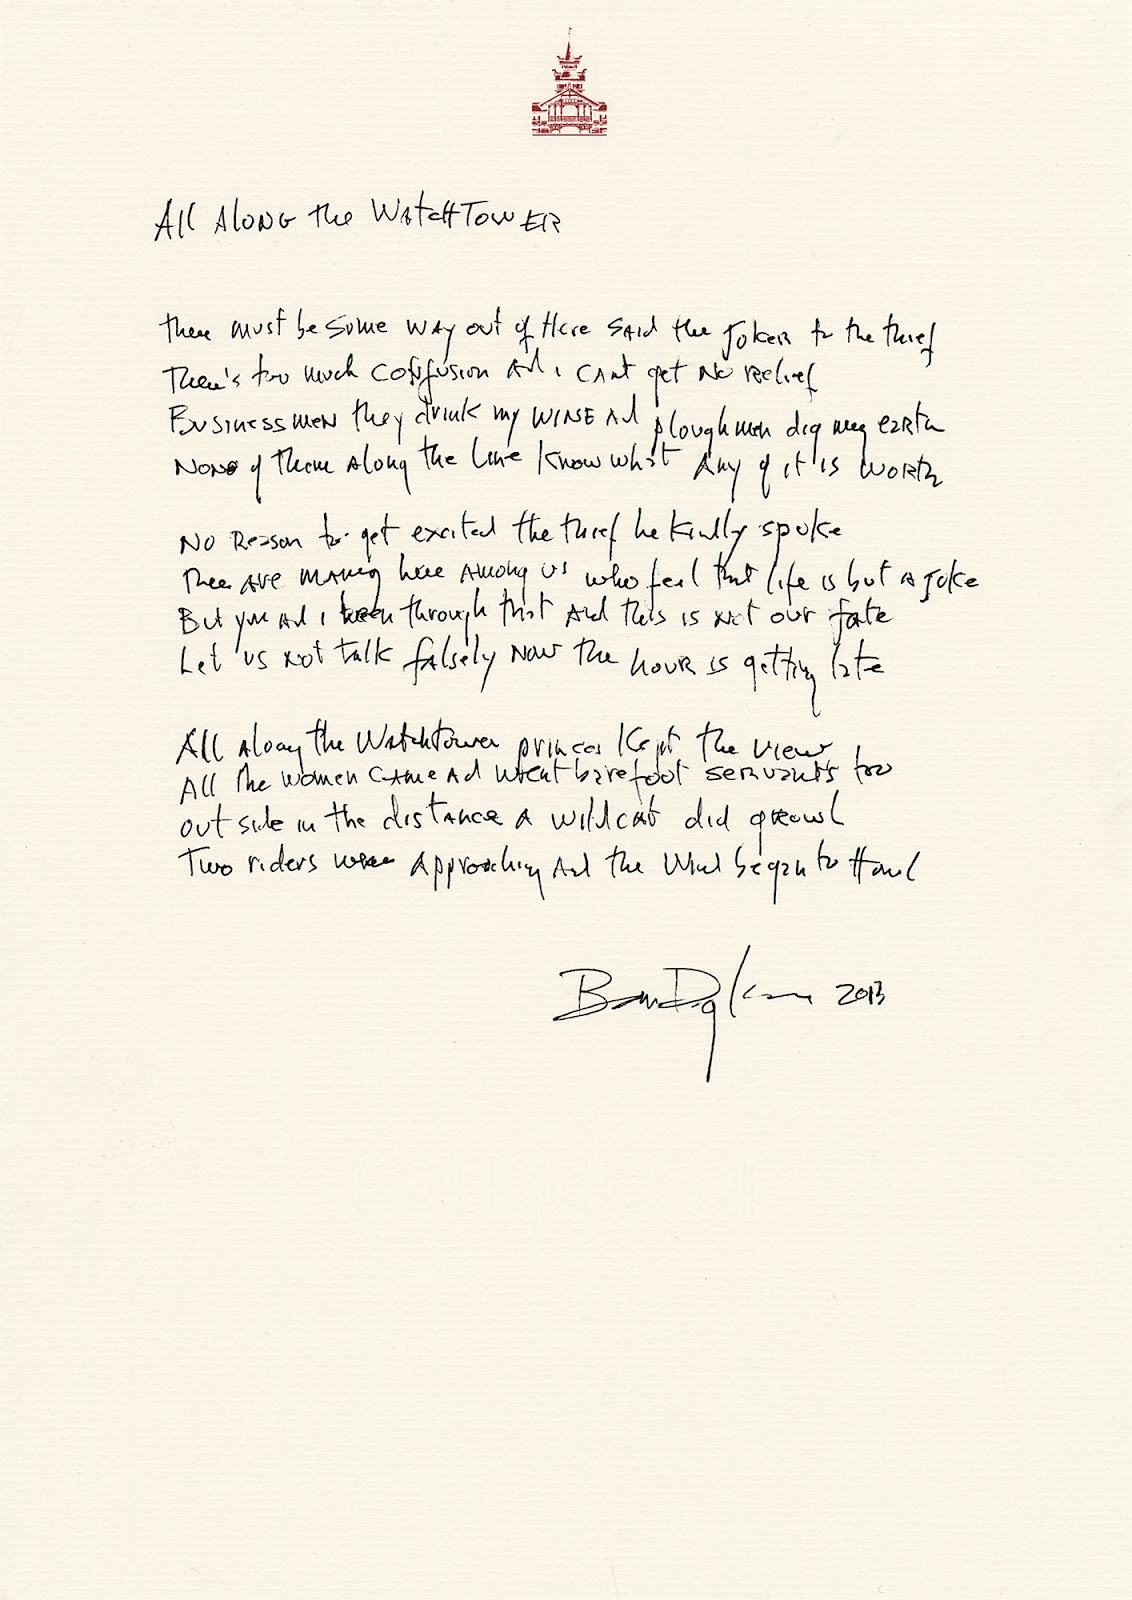 Bob Dylan’s handwritten lyrics for ‘All Along the Watchtower,’ signed and dated at the conclusion, “Bob Dylan, 2013.”